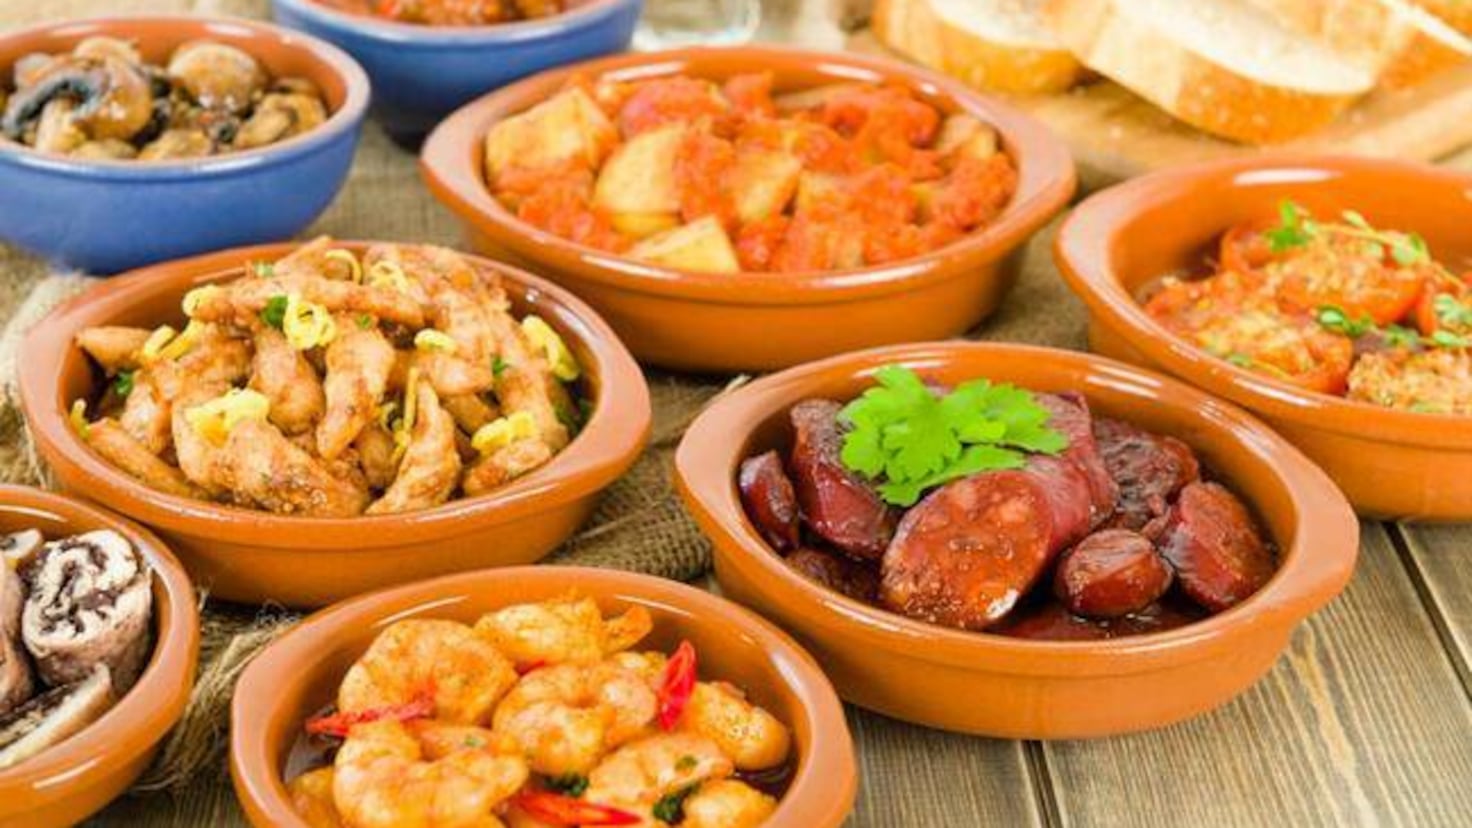 The best city in Spain to go for tapas, according to The Times
